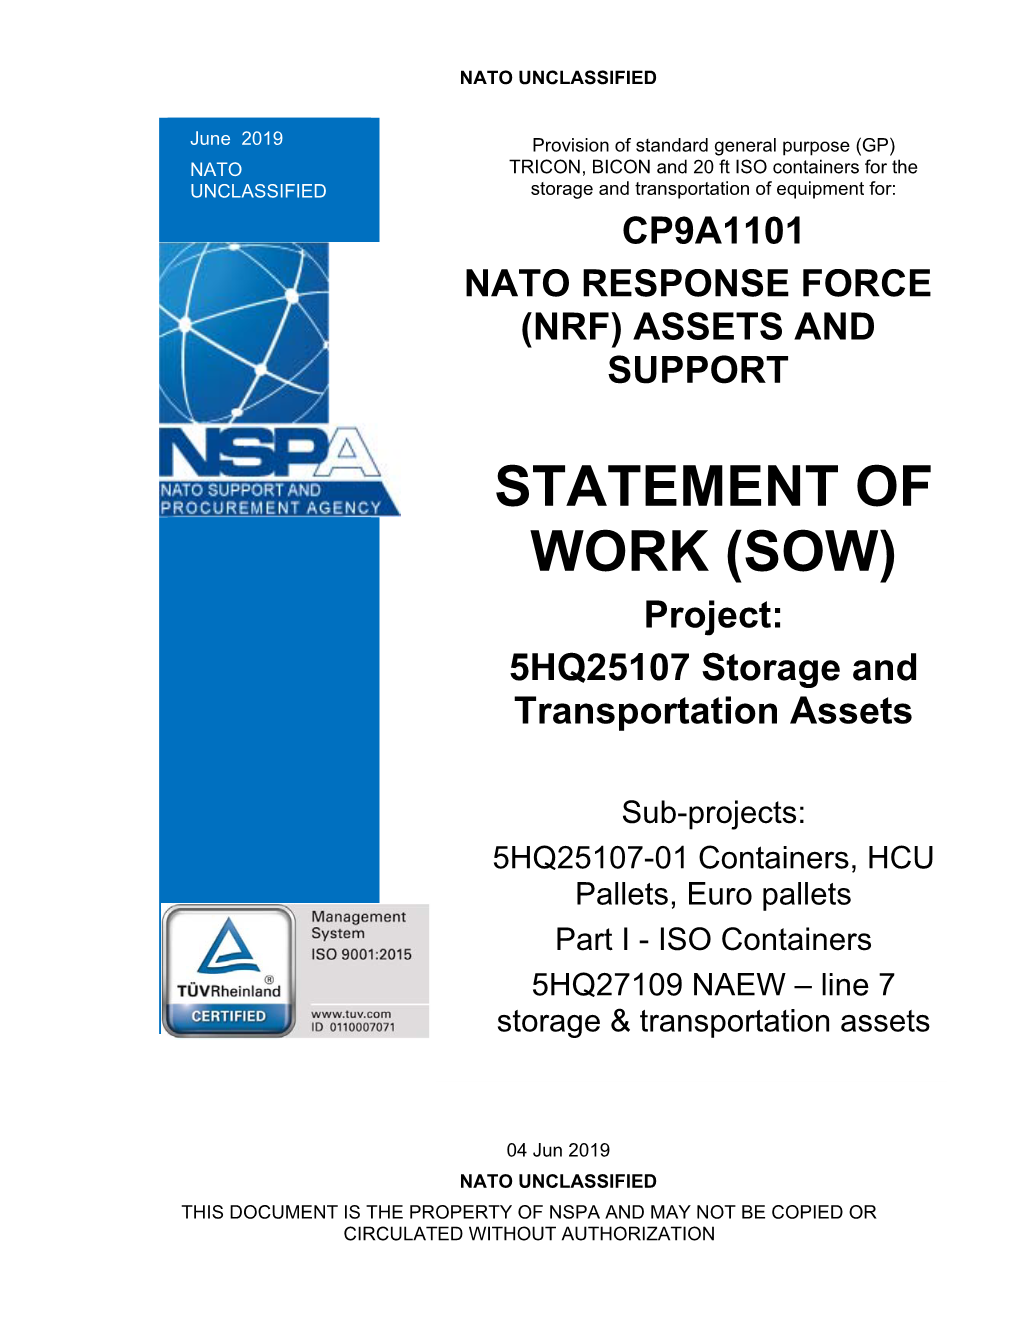 Statement of Work (SOW) Is Based on Requirements As Defined by the NATO Support and Procurement Agency (NSPA) on Behalf of Its Customer